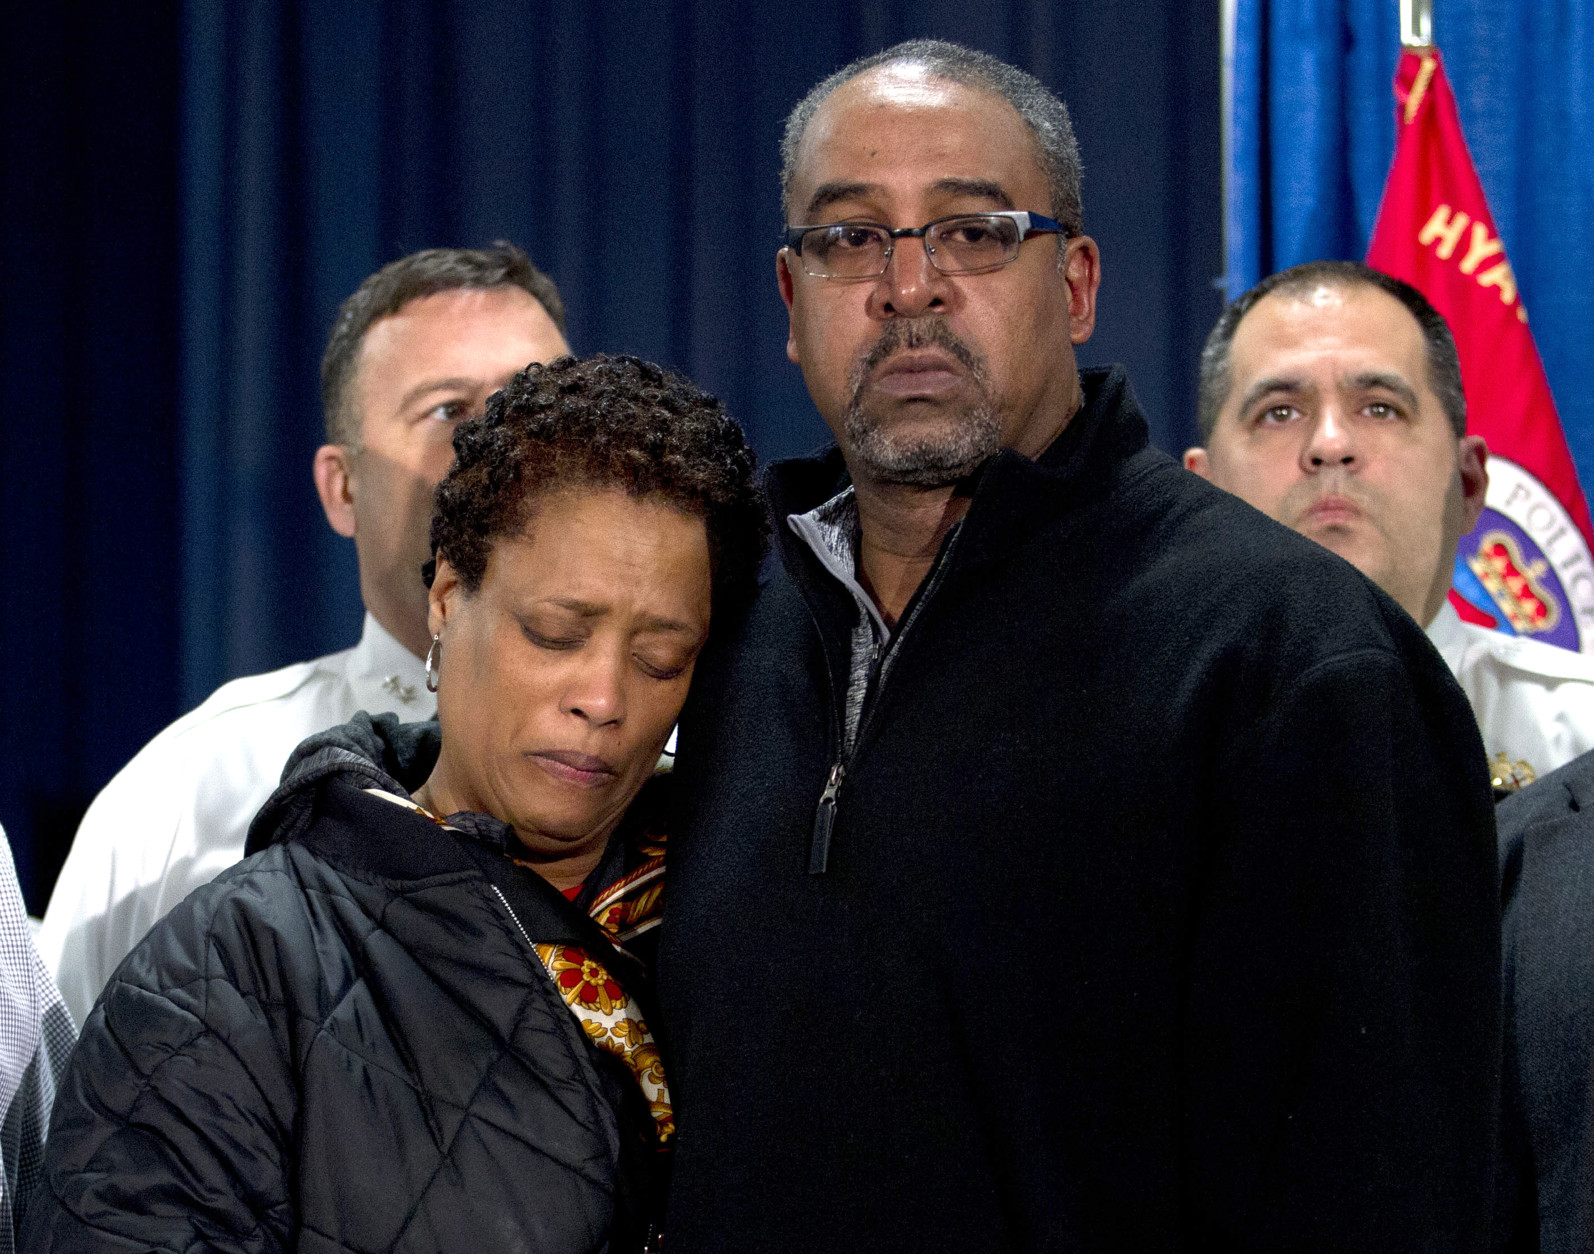 The parents of police officer Jacai Colson, James and Sheila Colson attend a news conference at Prince George's County Police headquarters Monday, March 14, 2016, in Hyattsville, Md. Colson, a four-year veteran of the force was shot outside the District III police station. Colson, a four-year veteran of the force and a undercover narcotics officer was mortally wounded by his own colleagues as he responded to an attack on his police station by a gunman with a death wish, their police chief angrily explained on Monday. ( AP Photo/Jose Luis Magana)